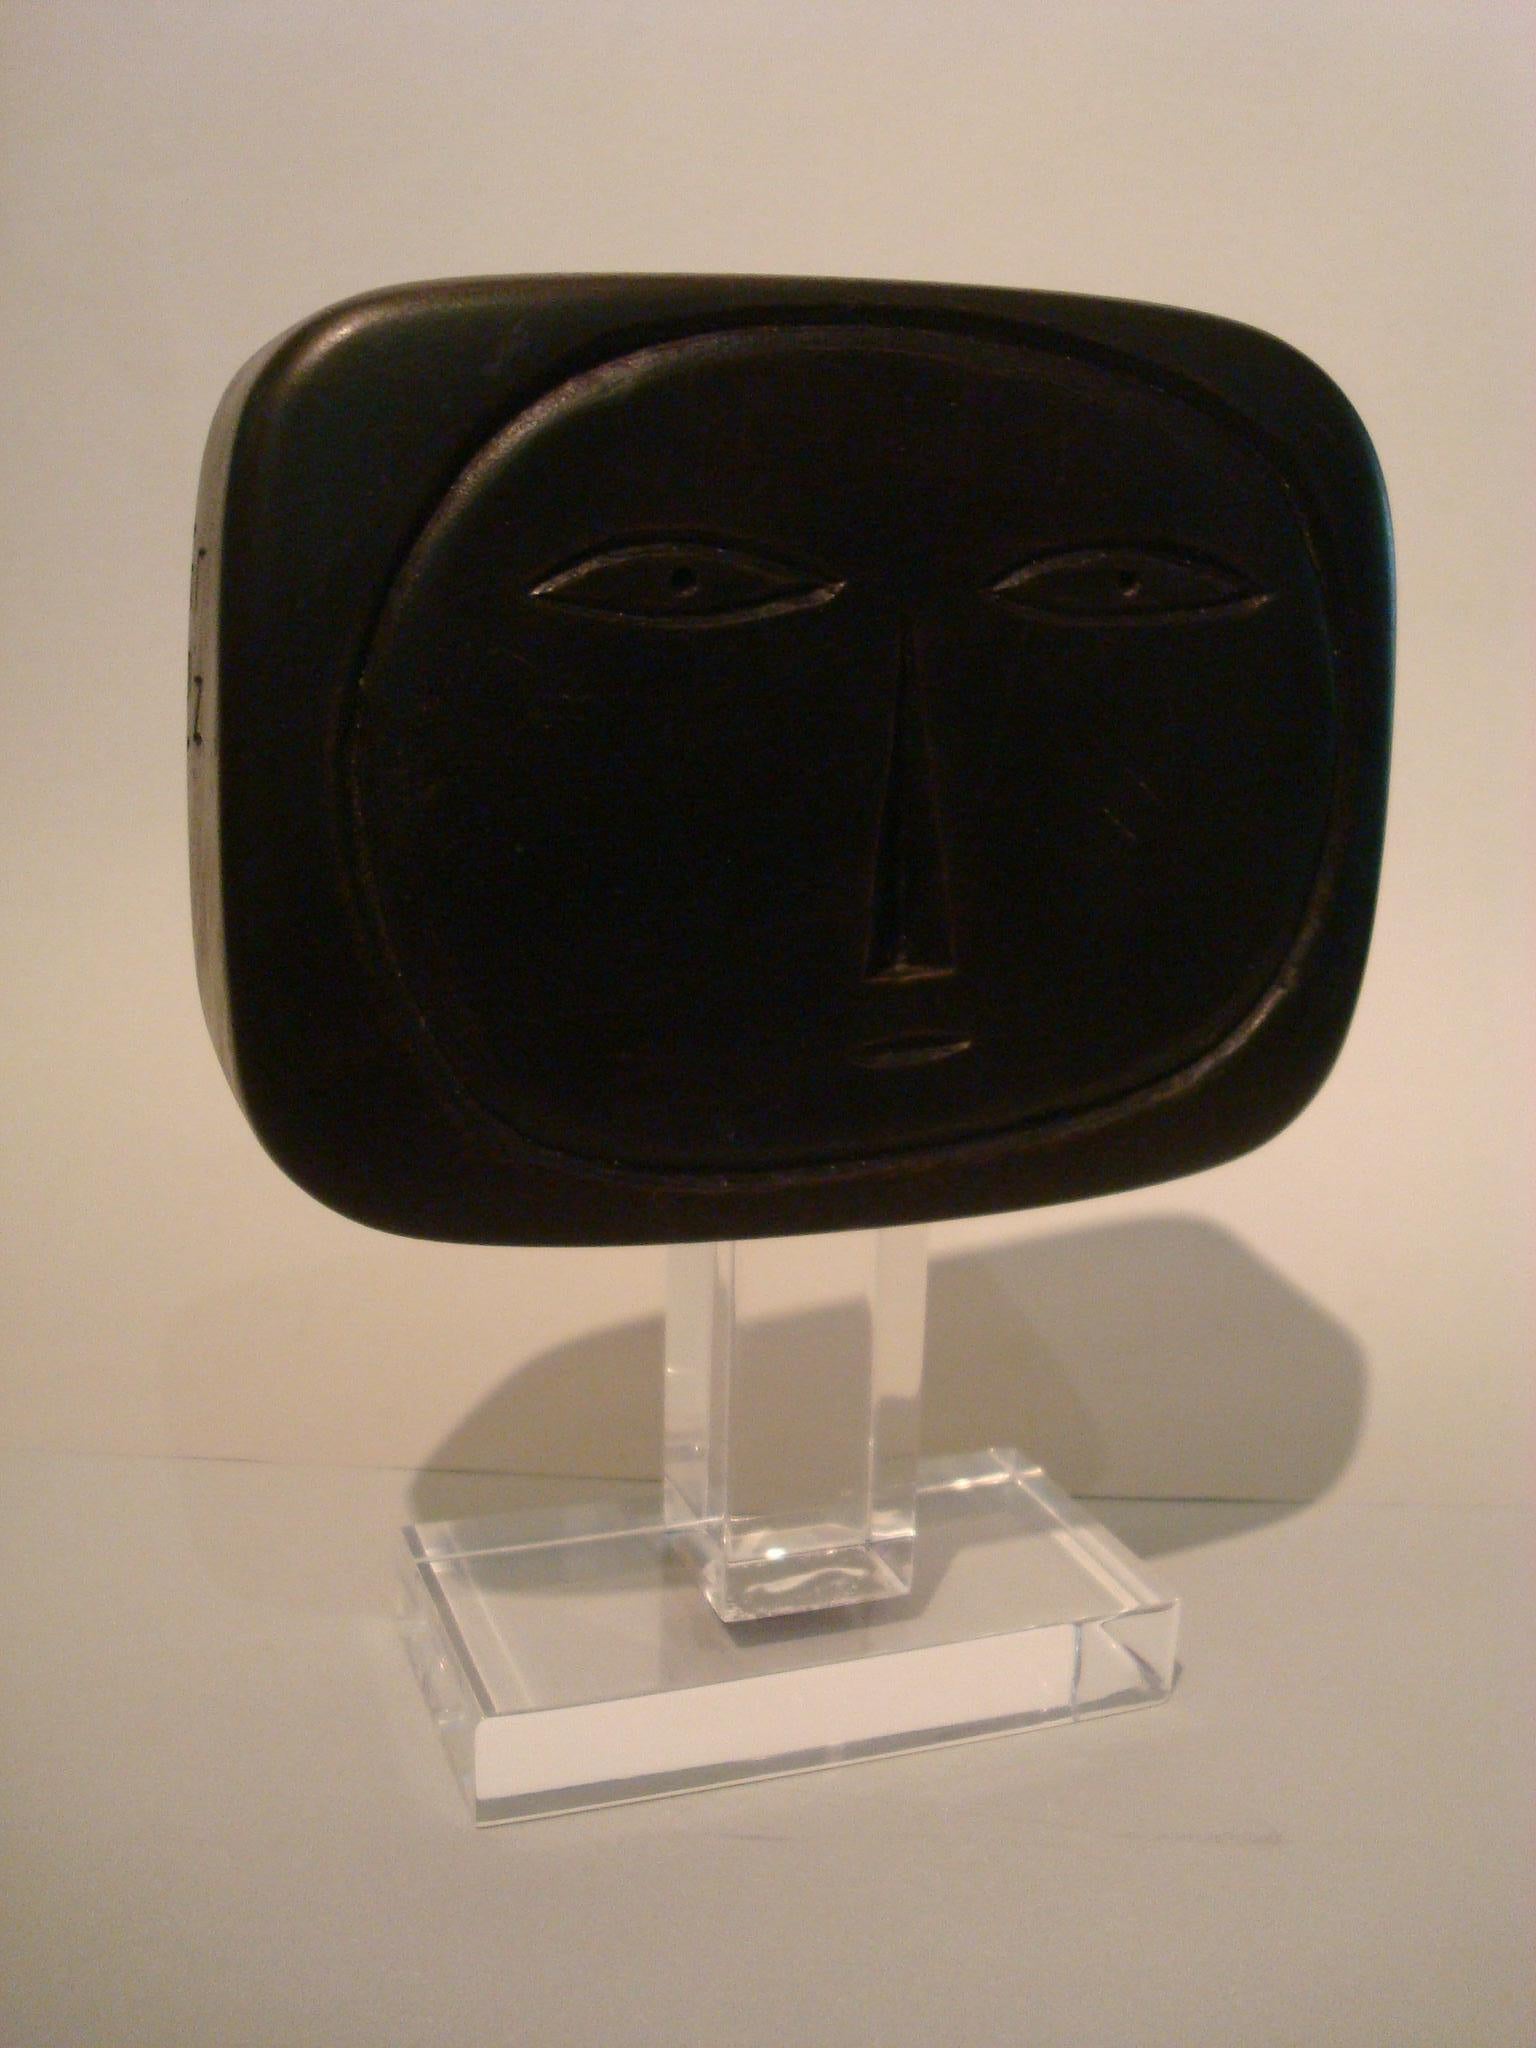 Mid-20th century wooden face sculpture 1950s.
Signed L.N. 1951
Painted wood sculpture, signed and dated on left side. Supported on an acrylic base.

